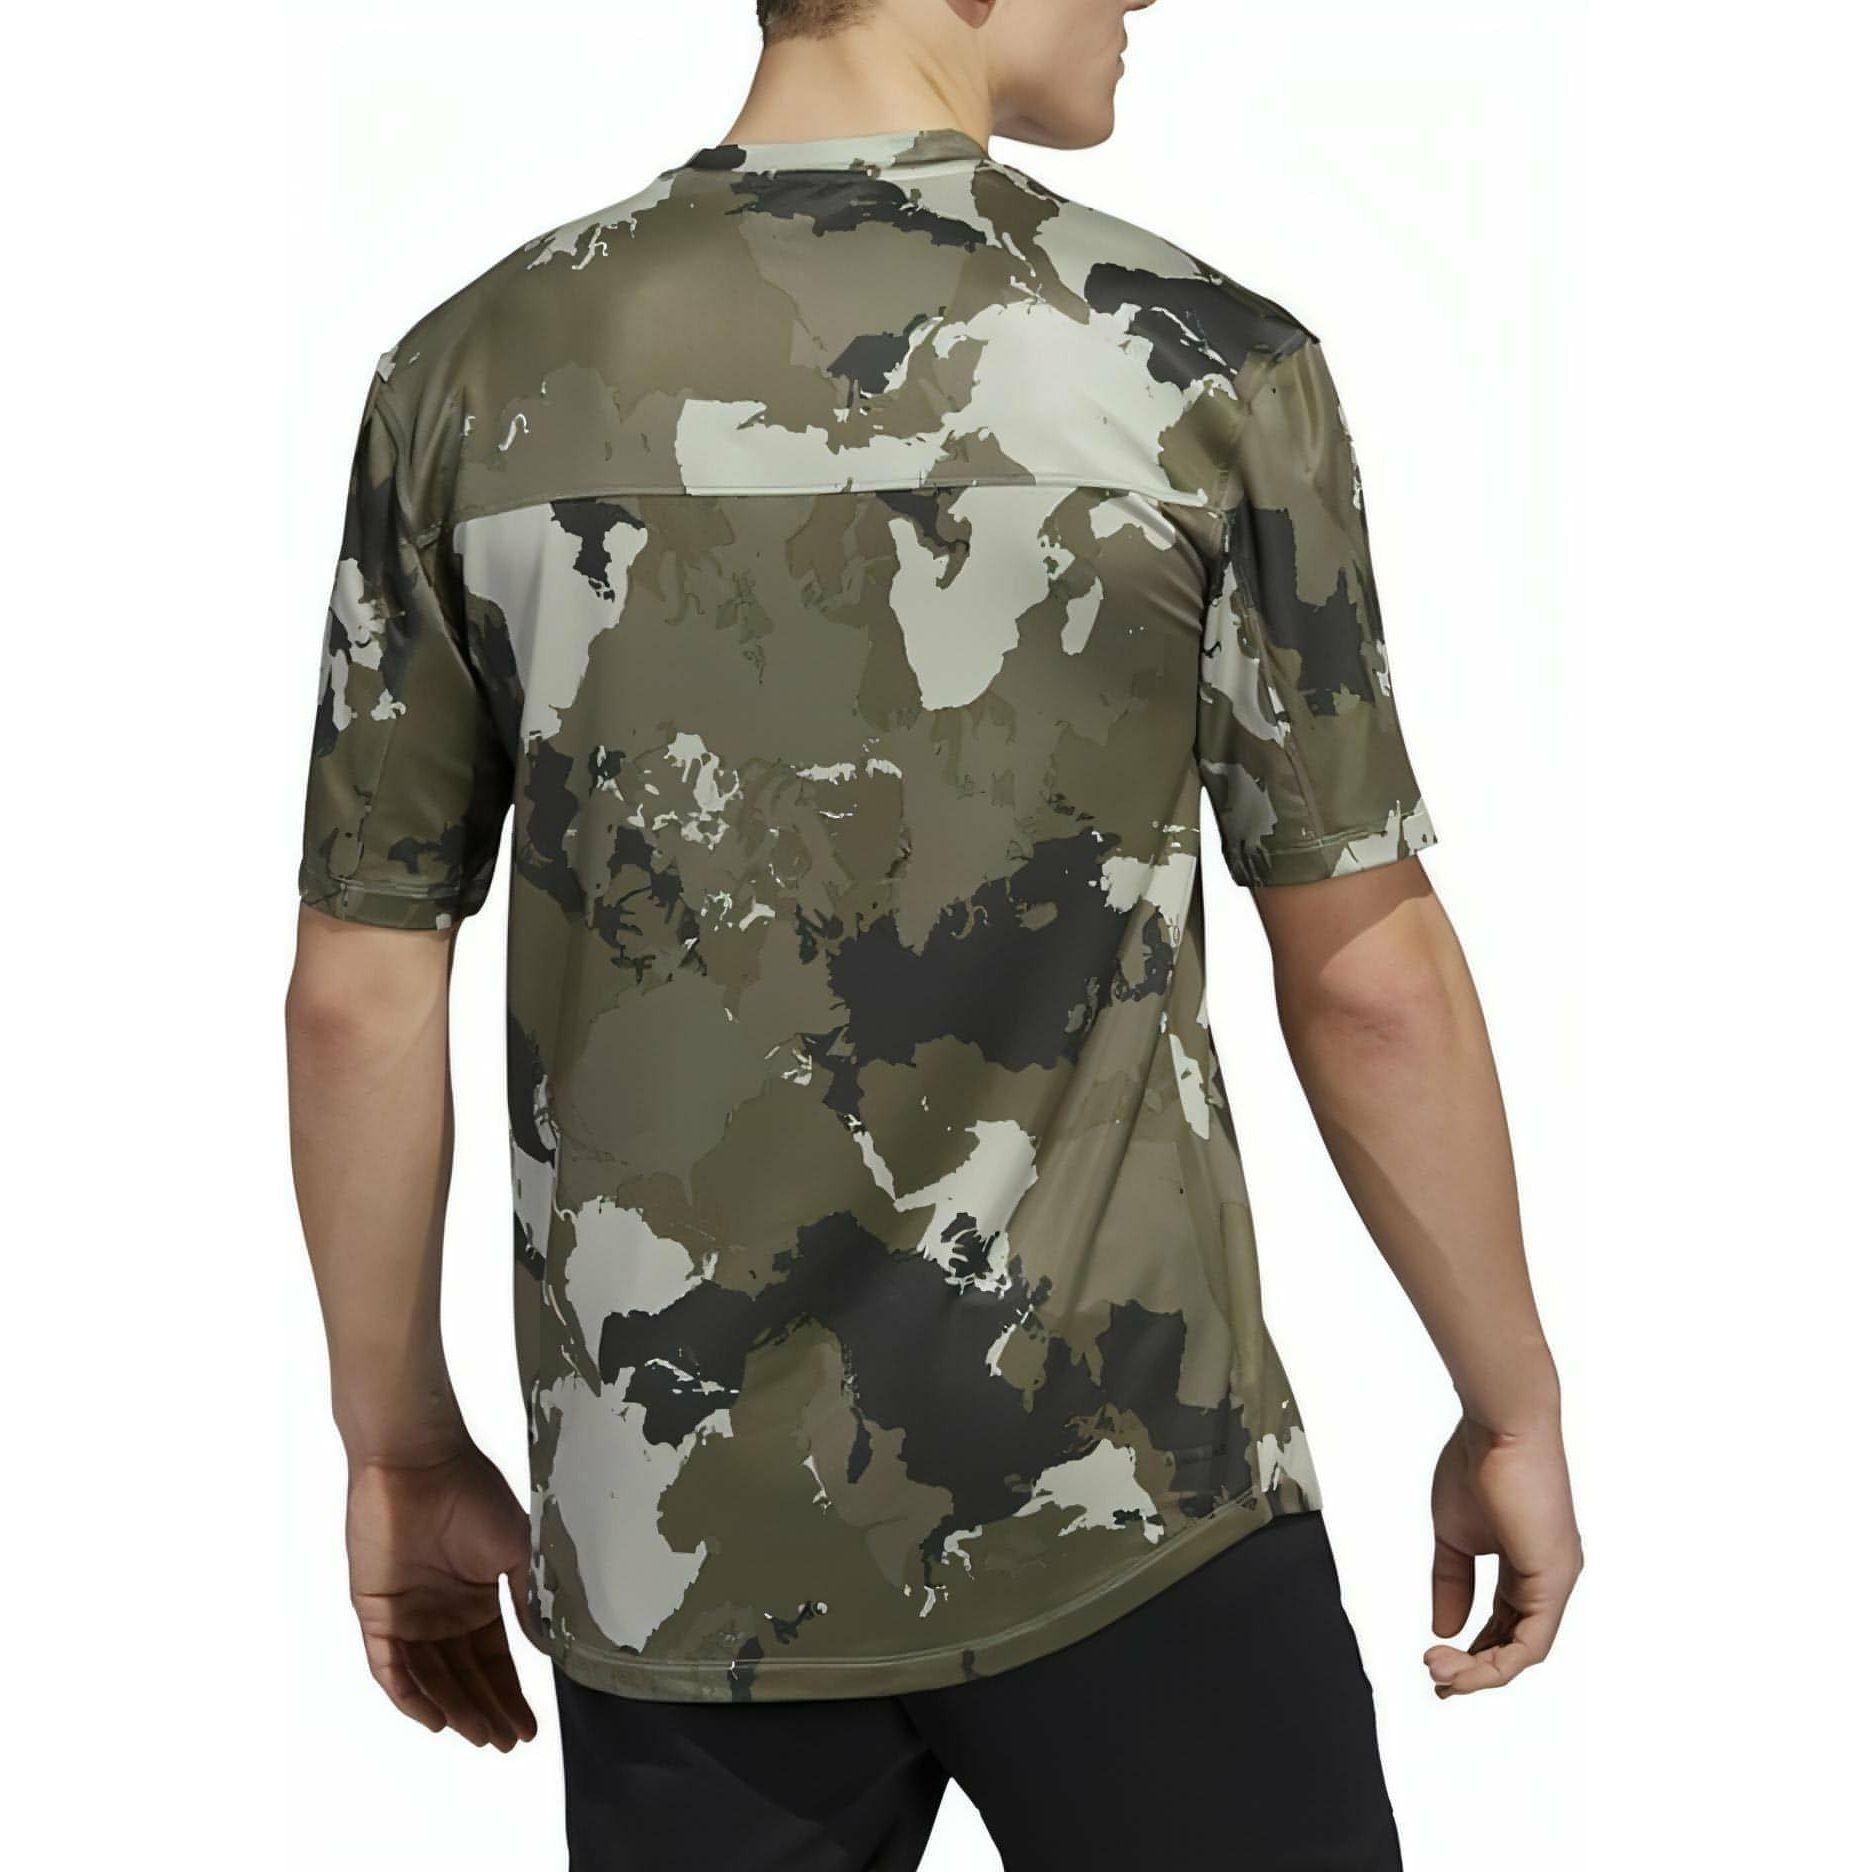 Adidas Continent Camo City Short Sleeve Gc8265 Back View